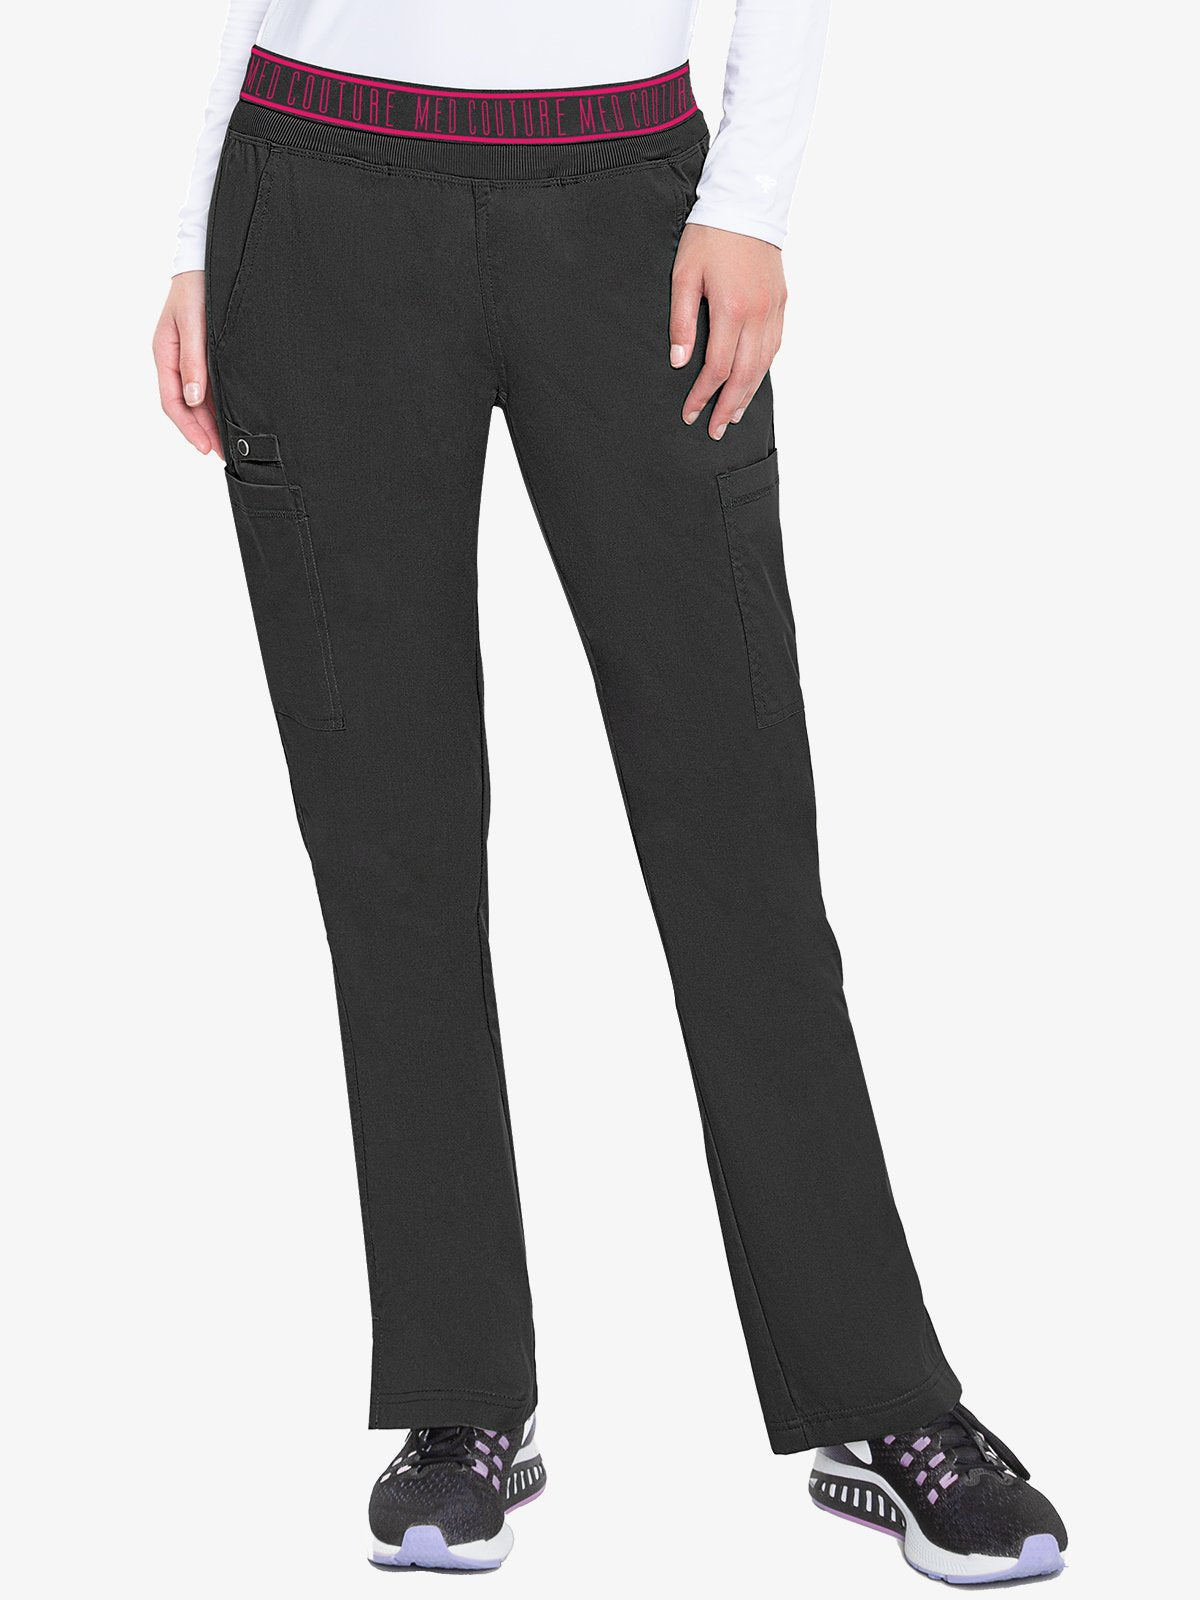 Med Couture Touch 7739 Women's Yoga 2 Cargo Pant - PETITE Black